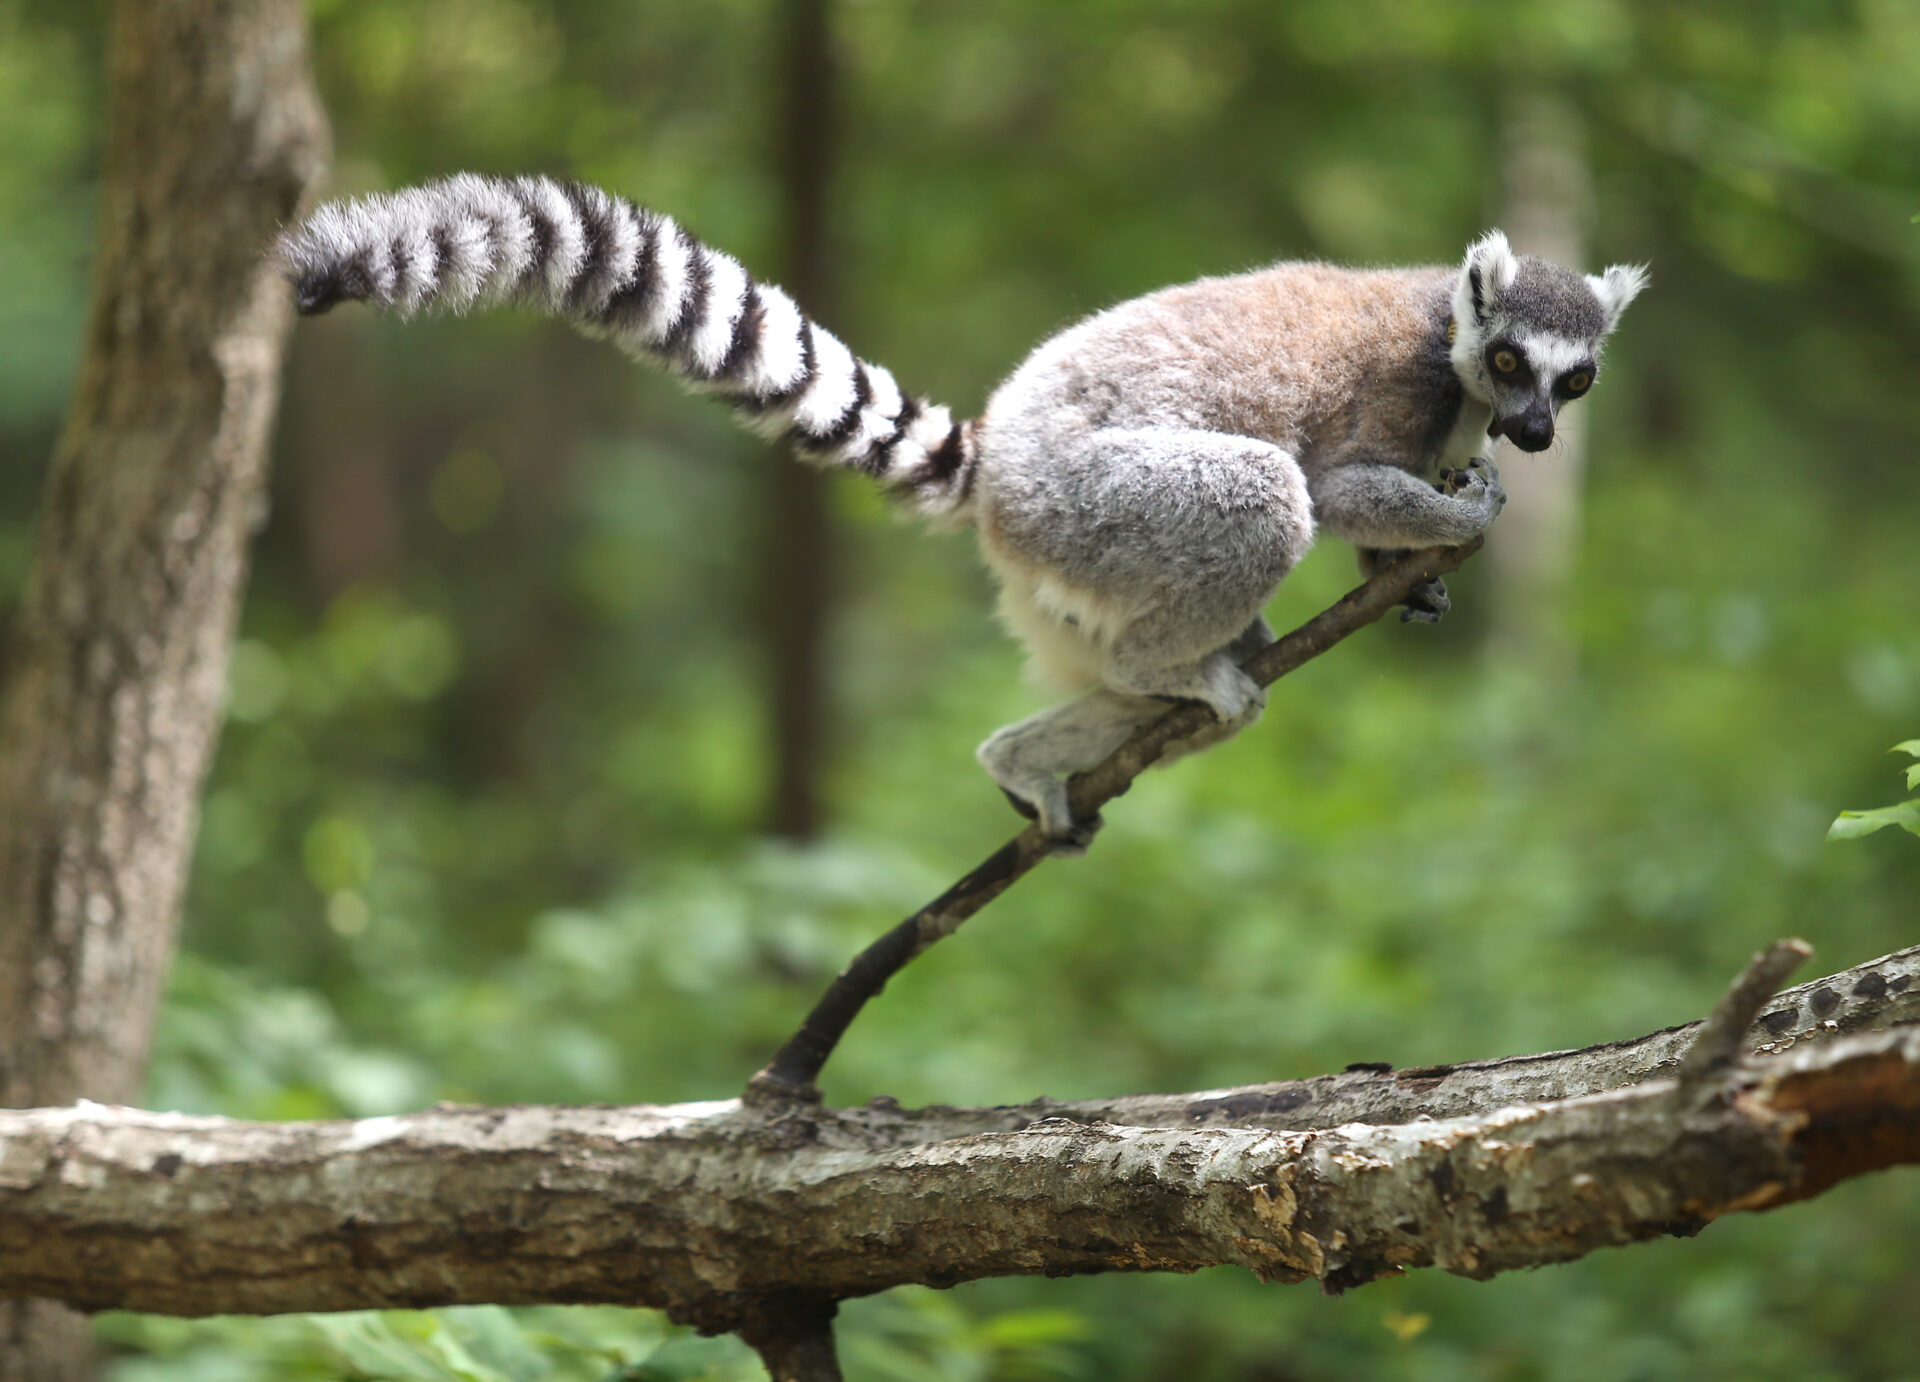 Ring-tailed lemur scent-marking a branch in the forest. Photo by Bob Karp.